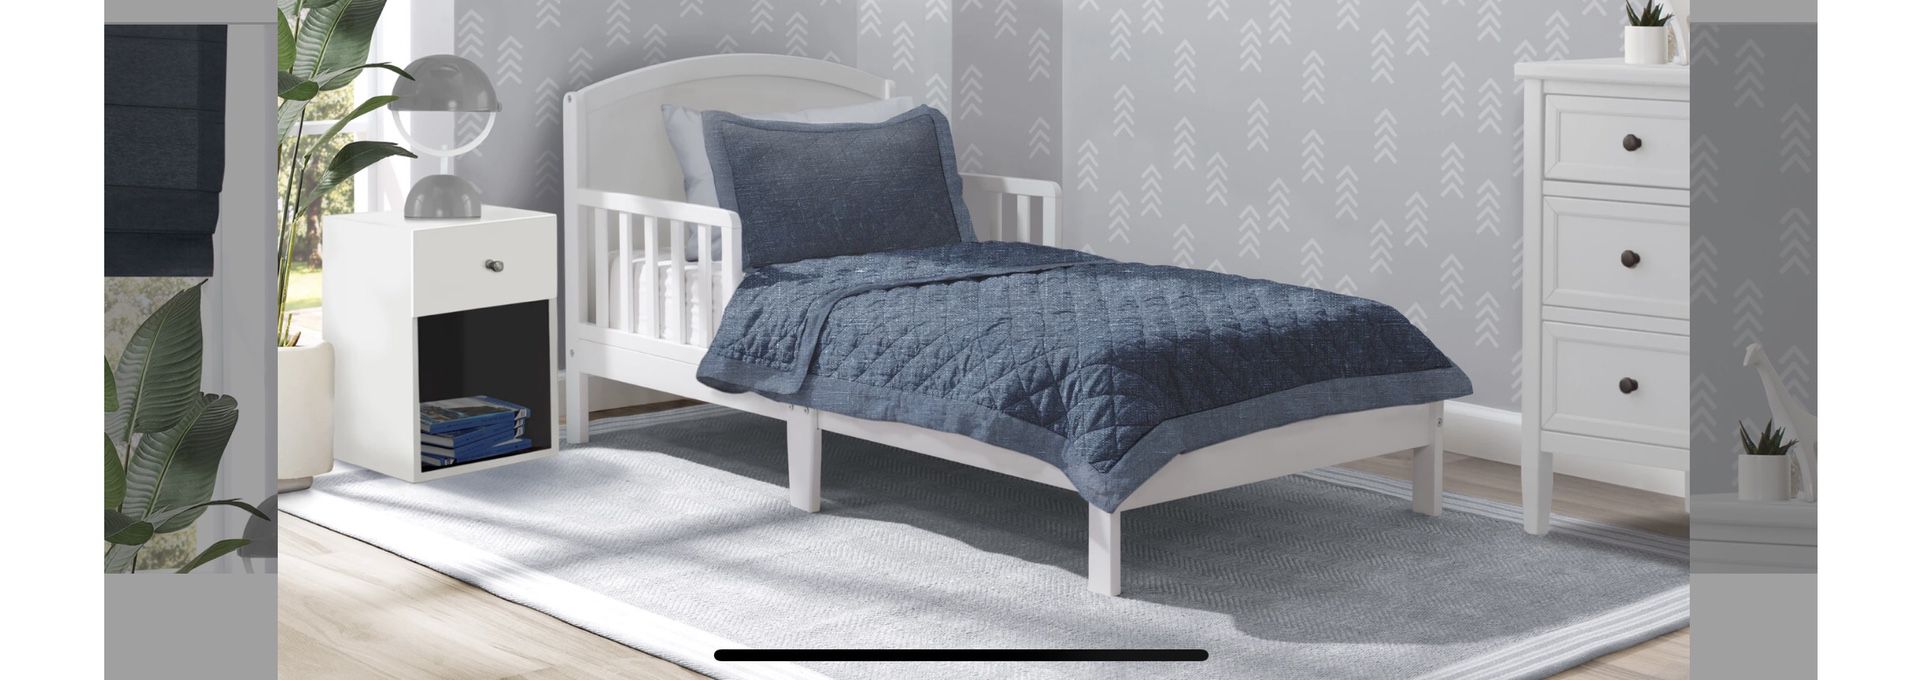 Toddler Bed - Delta Children’s Products